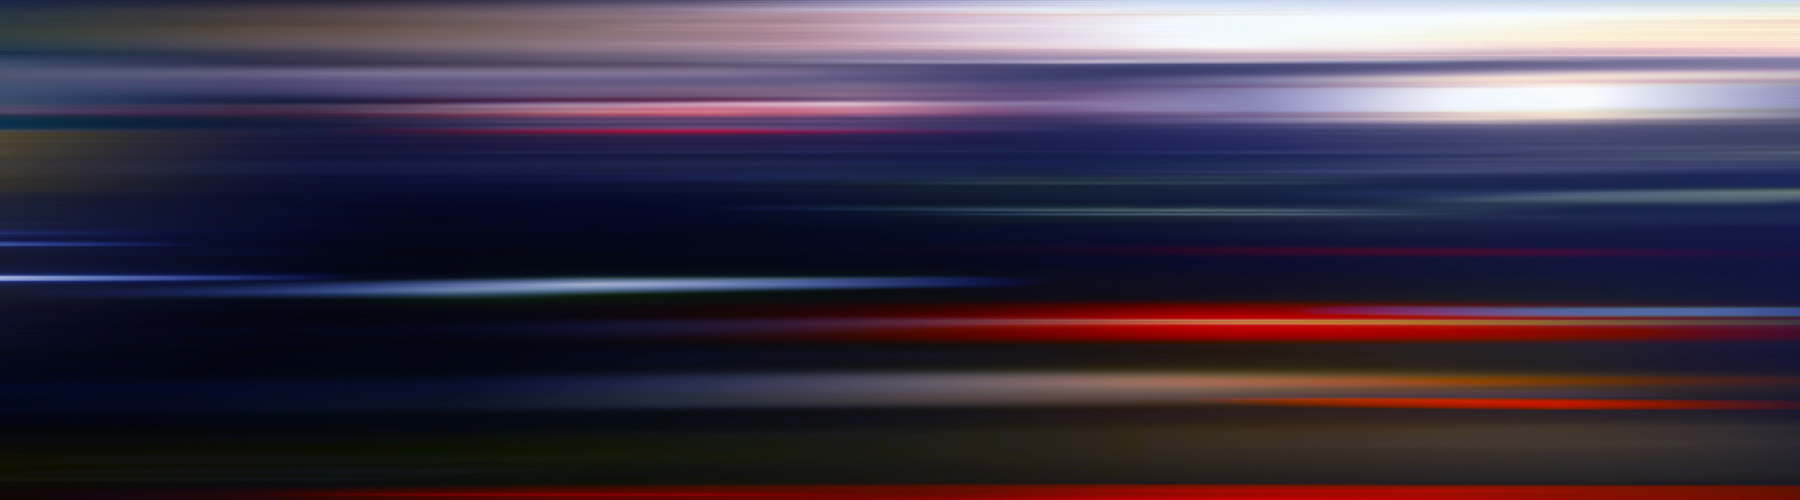 Picture of purple, blue, red and orange lines running horizontally